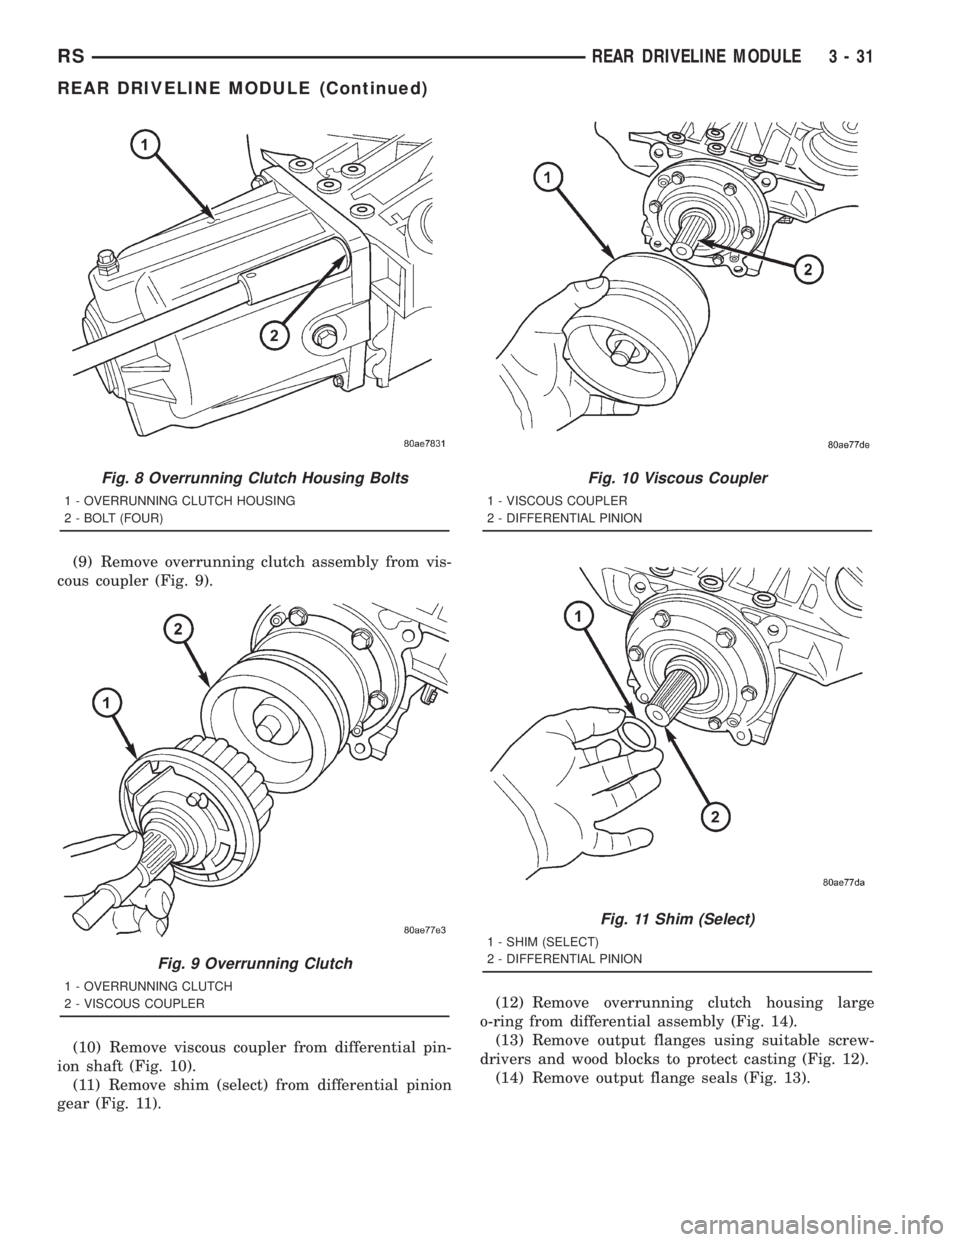 CHRYSLER VOYAGER 2001  Service Manual (9) Remove overrunning clutch assembly from vis-
cous coupler (Fig. 9).
(10) Remove viscous coupler from differential pin-
ion shaft (Fig. 10).
(11) Remove shim (select) from differential pinion
gear 